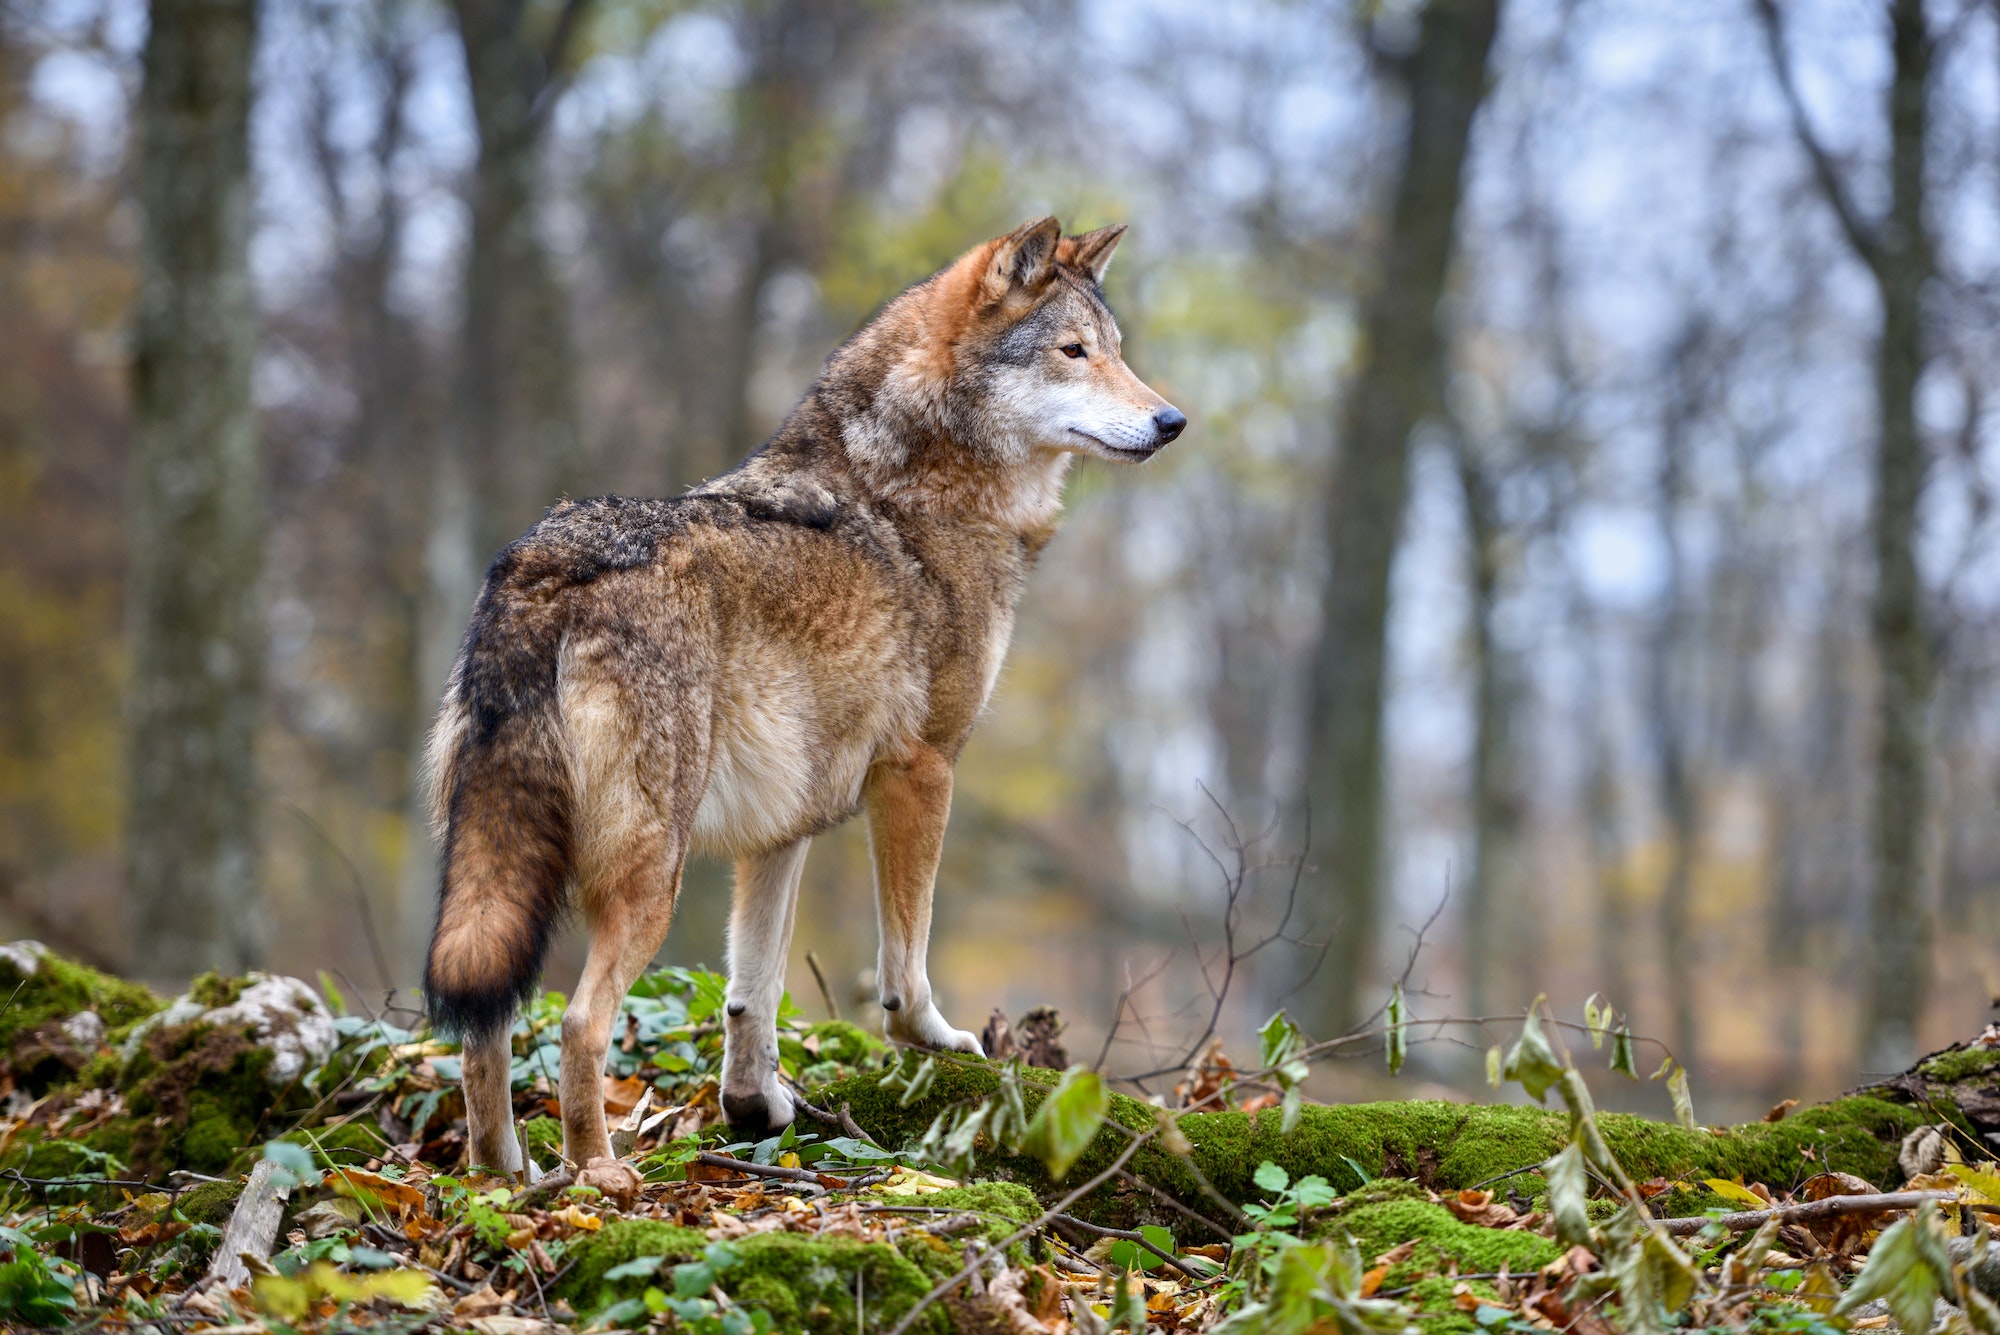 Wolf (Canis lupus) in autumn forest. Grey wolf in natural habitat